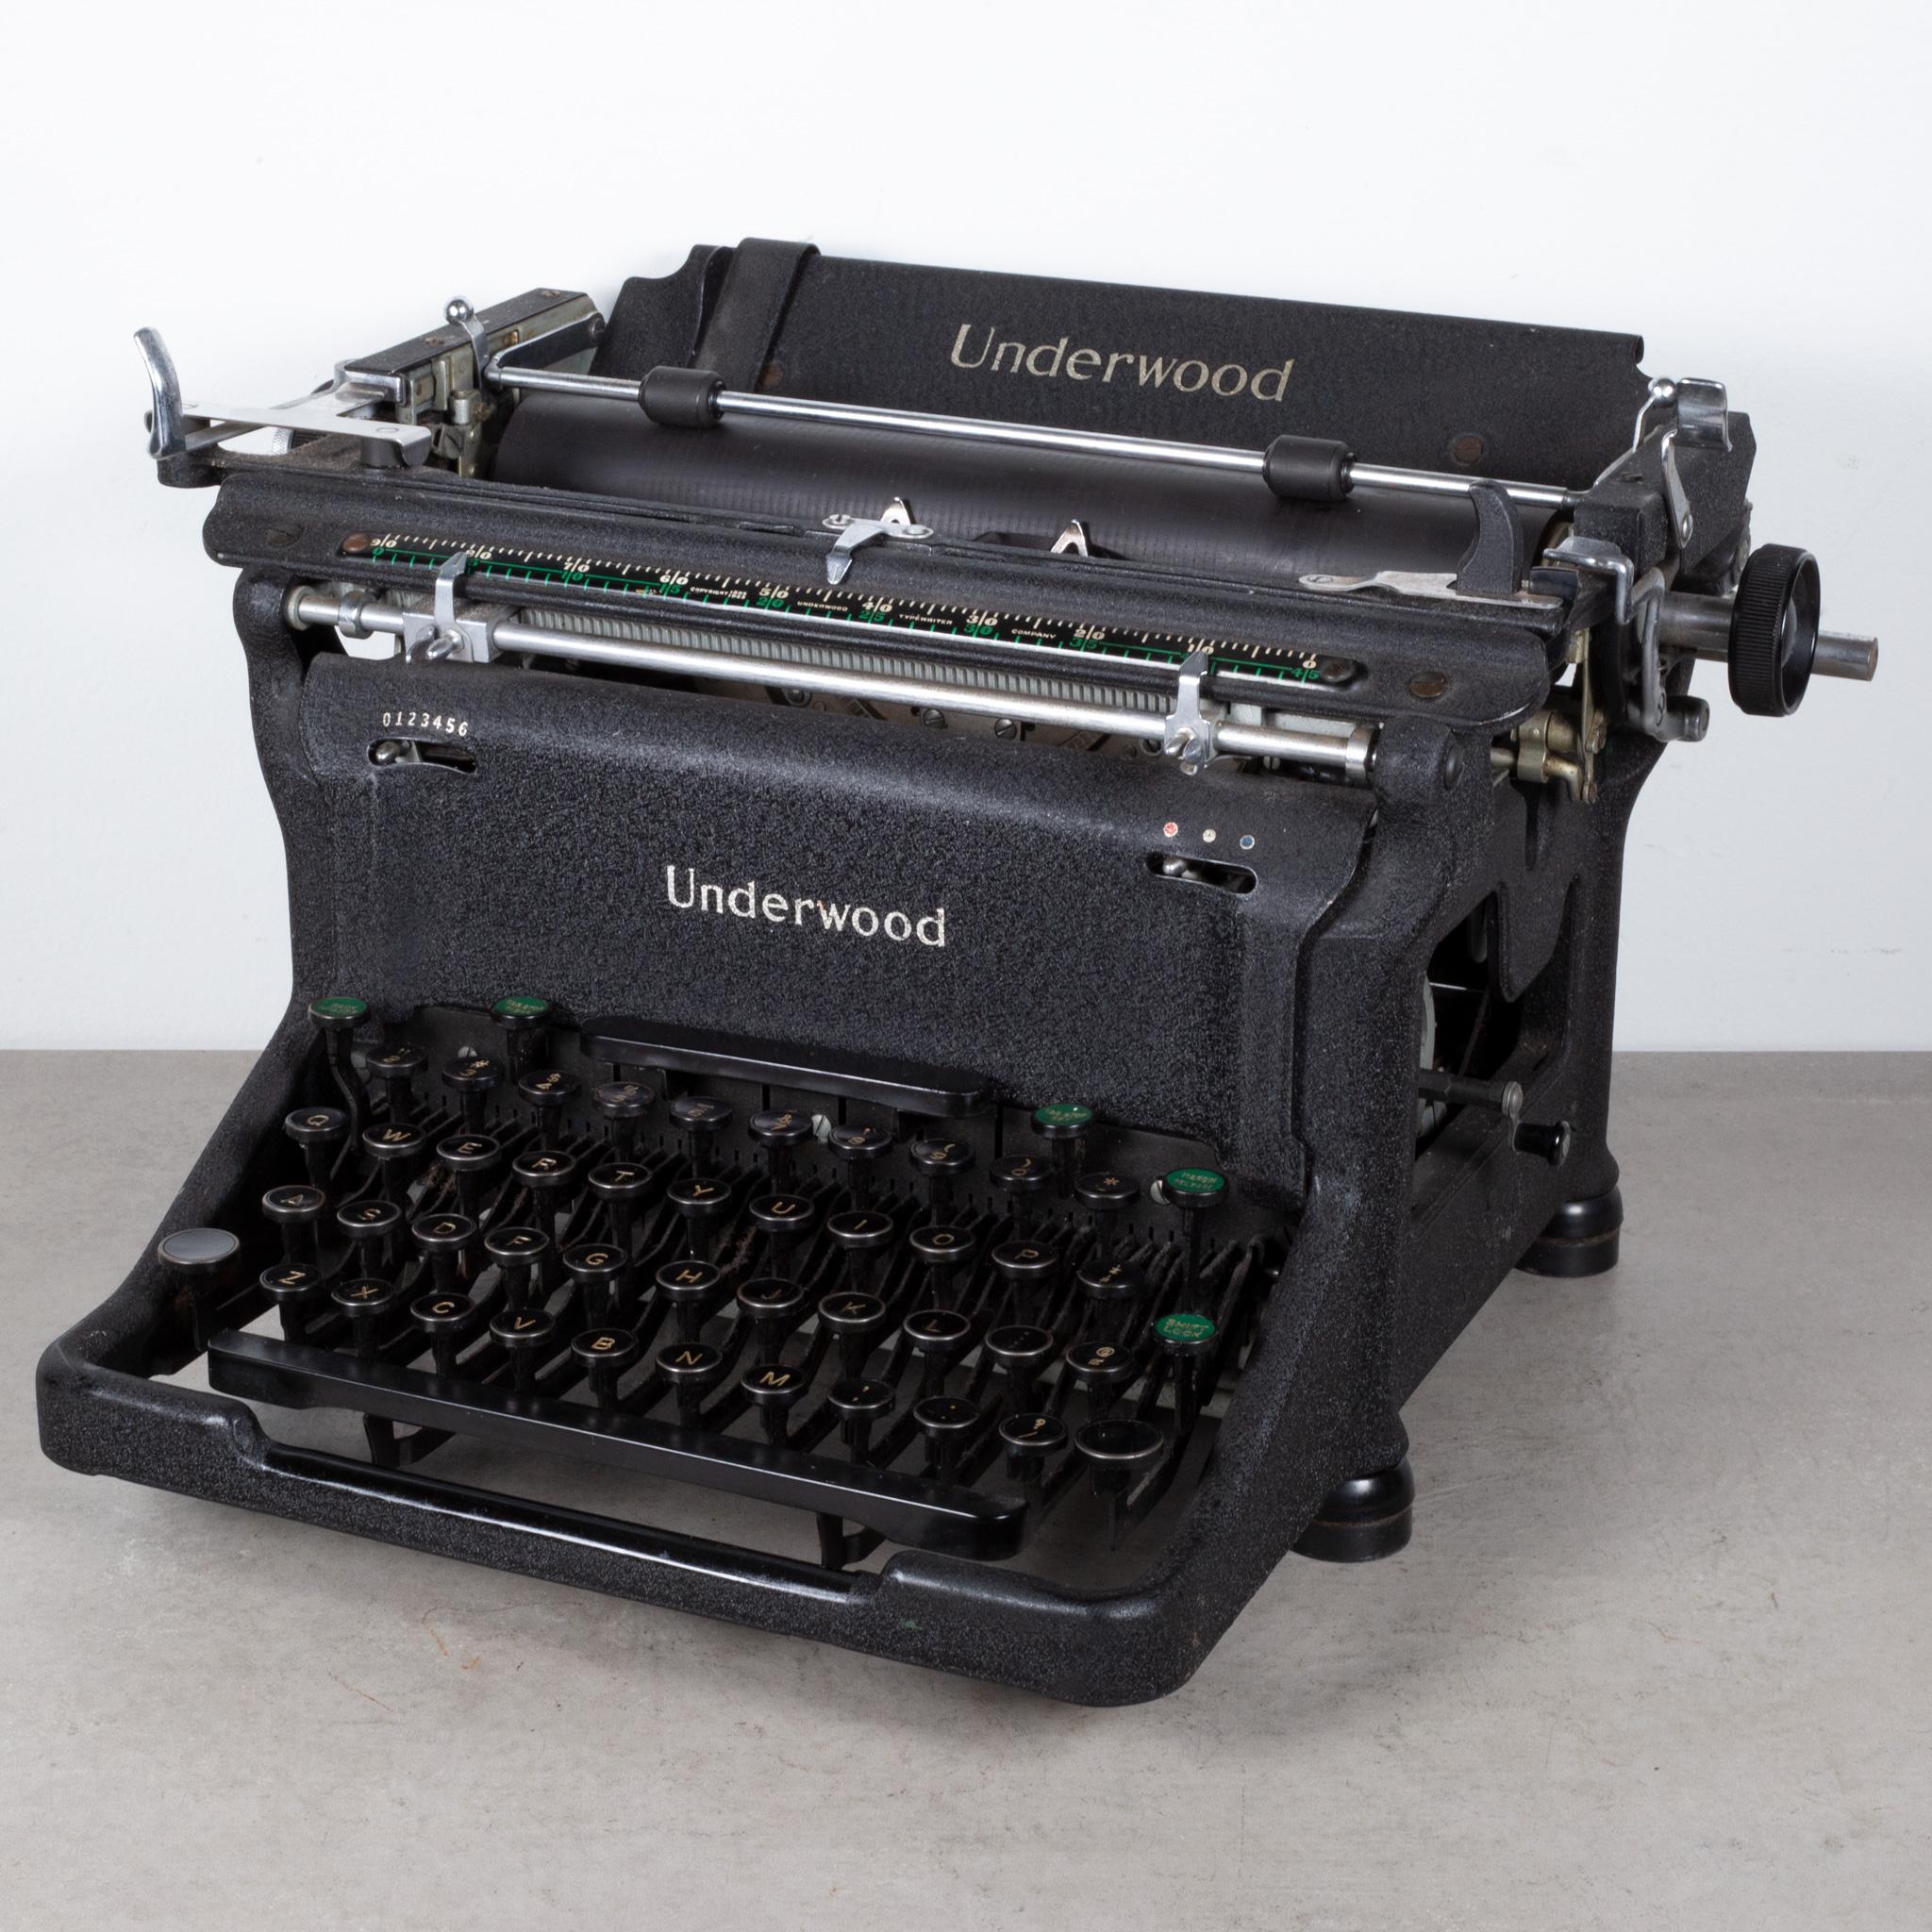 About

An original Underwood typewriter with black crinkle finish. The typewriter functions properly except the space bar has ceased up and needs repair. New ribbon. The keys are brass and black with gold letters. All the keys work properly and